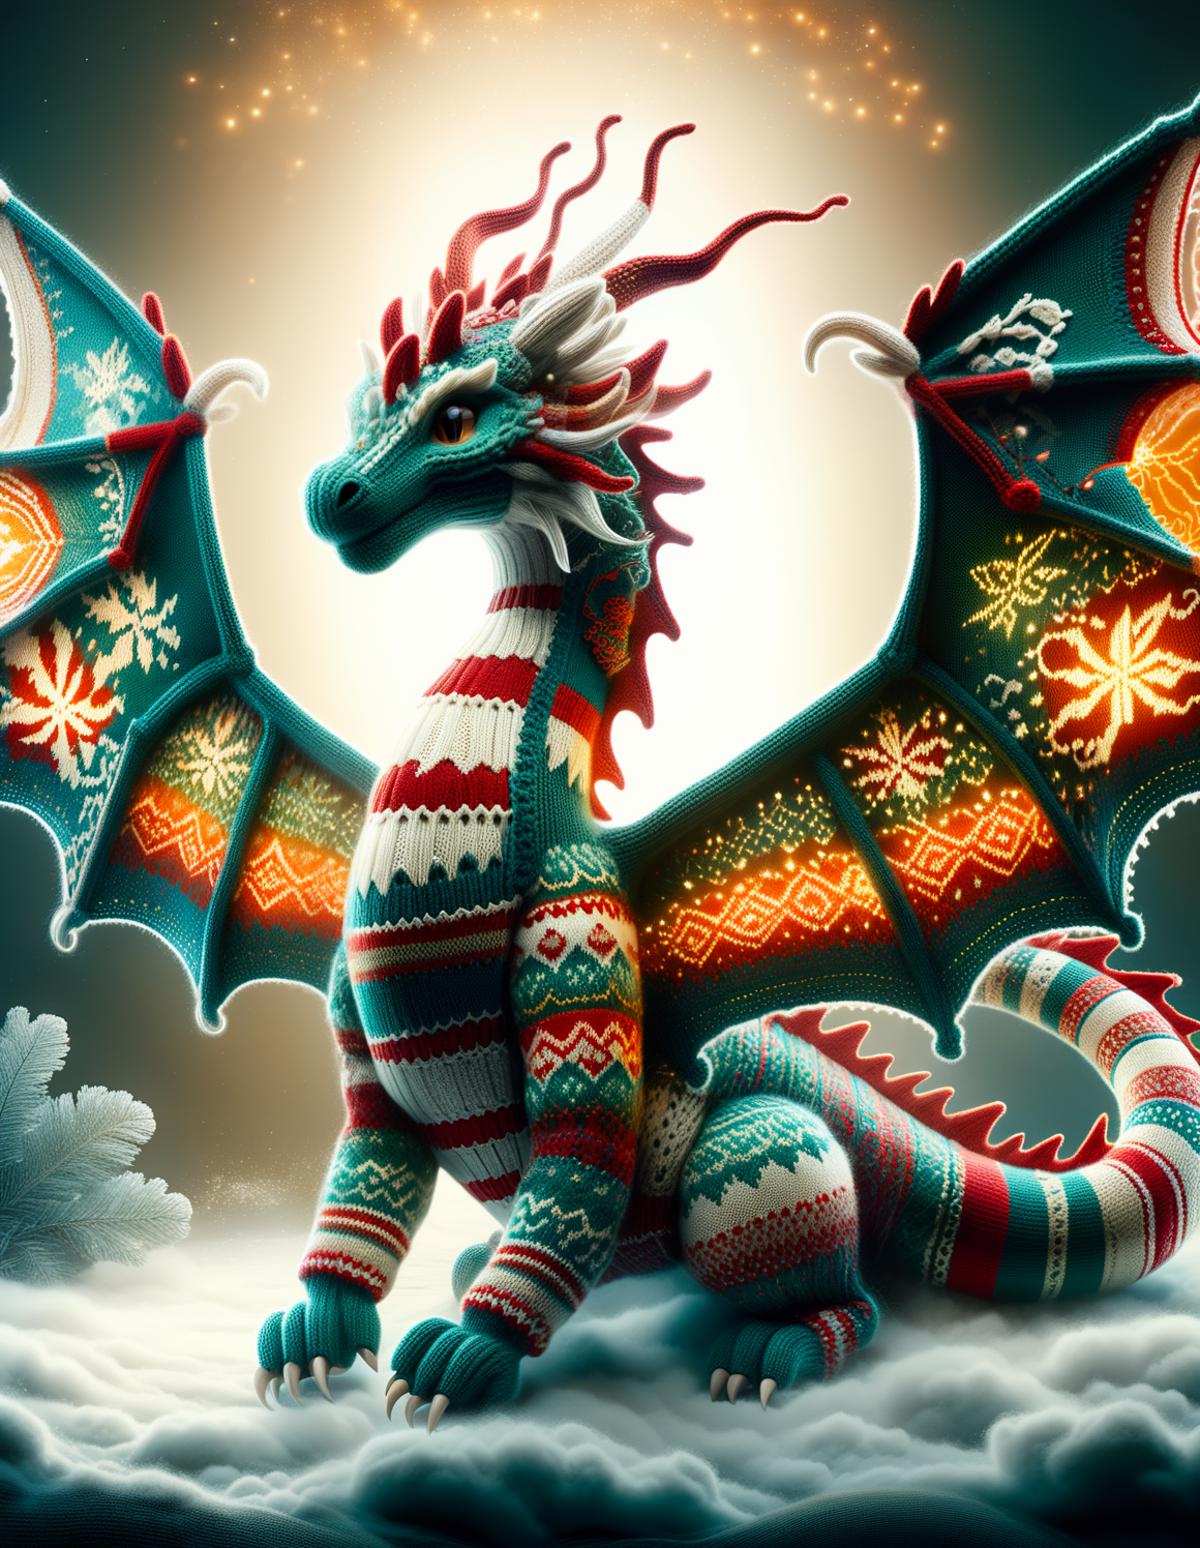 Colorful Dragon with Sweater Design and Red, Green, and White Patterns on Neck and Wing.